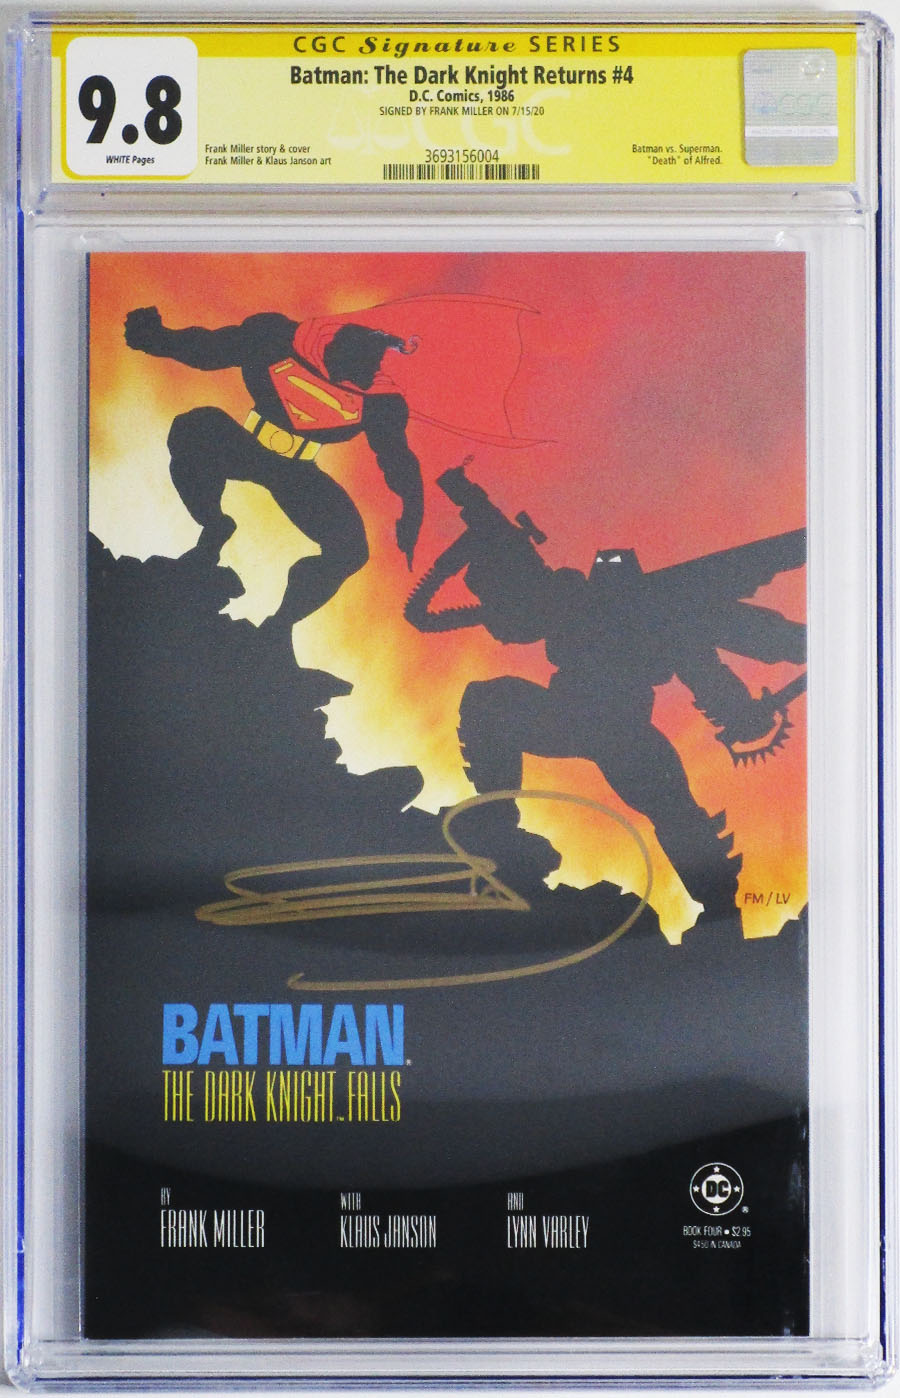 Batman The Dark Knight Returns #4 Cover C CGC Signature Series 9.8 Signed by Frank Miller